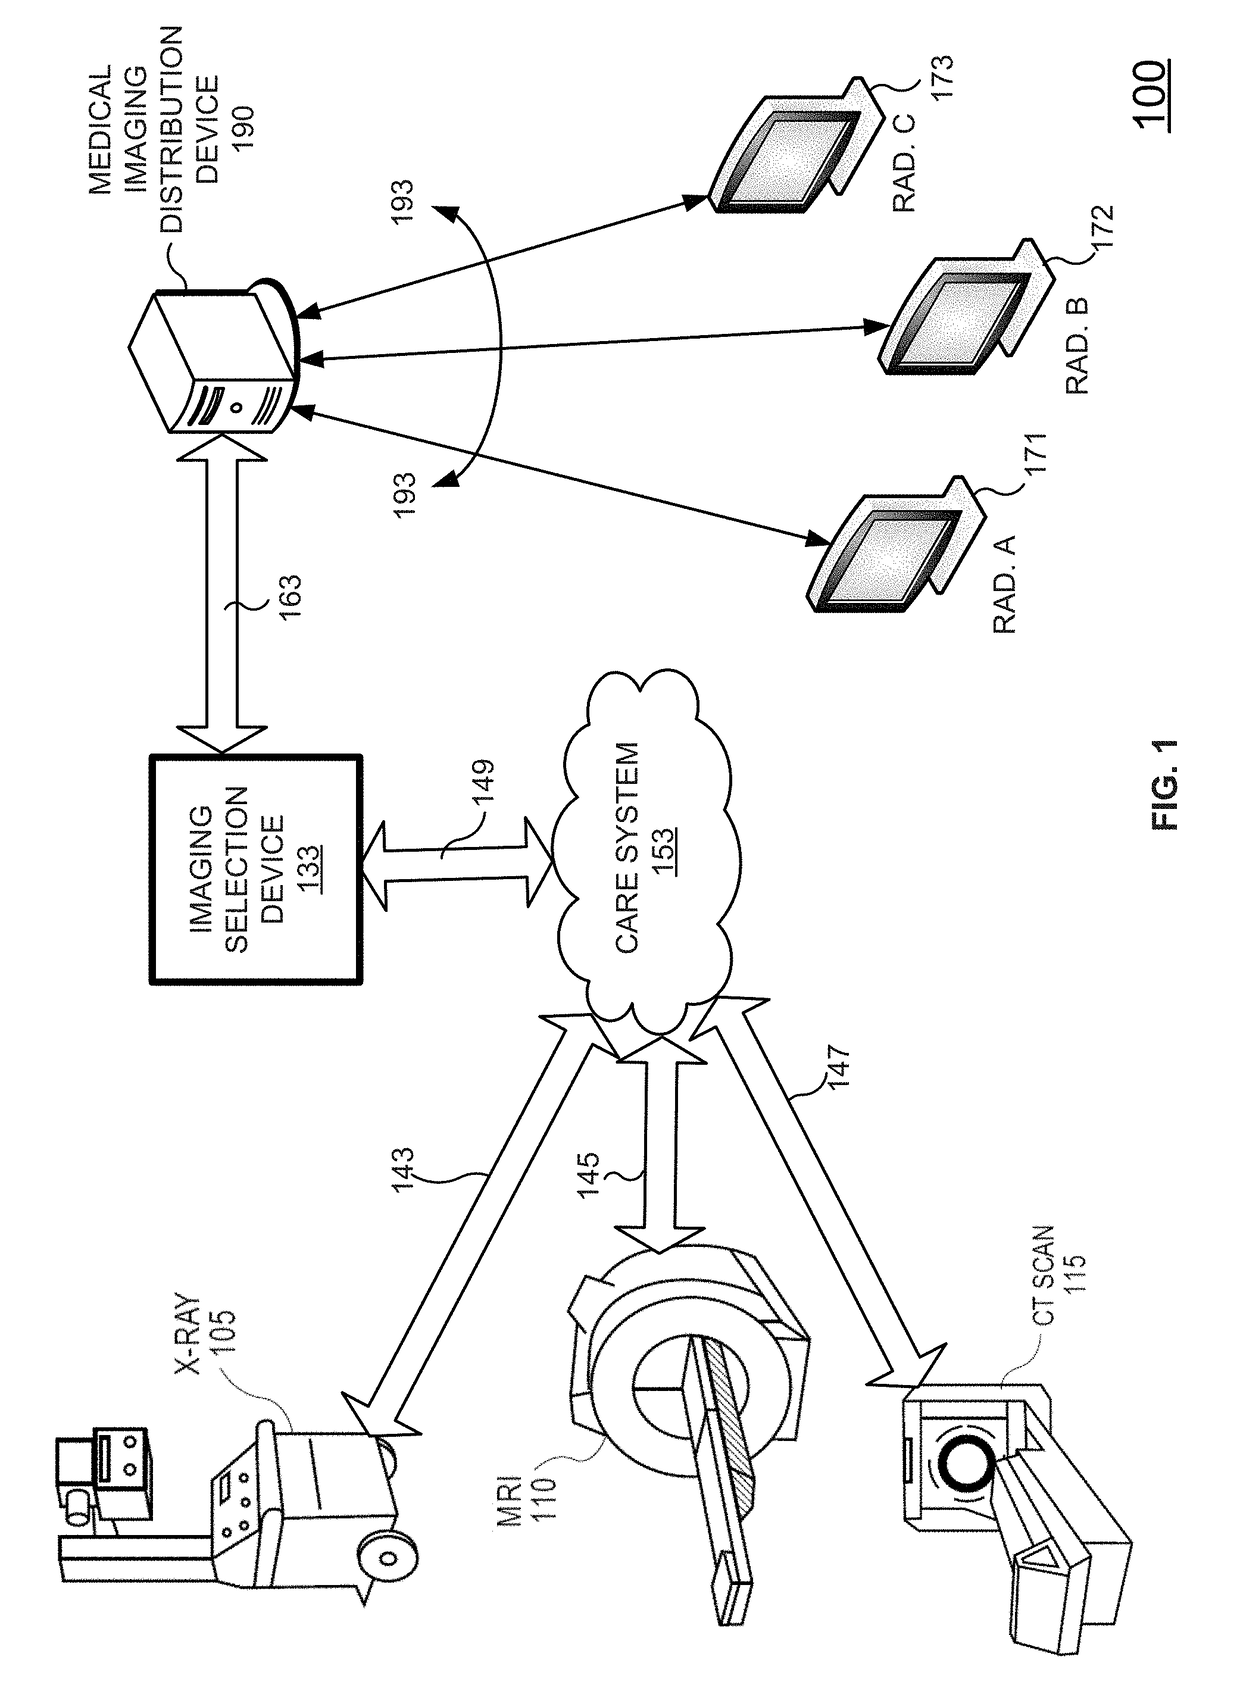 System and method for medical imaging report input